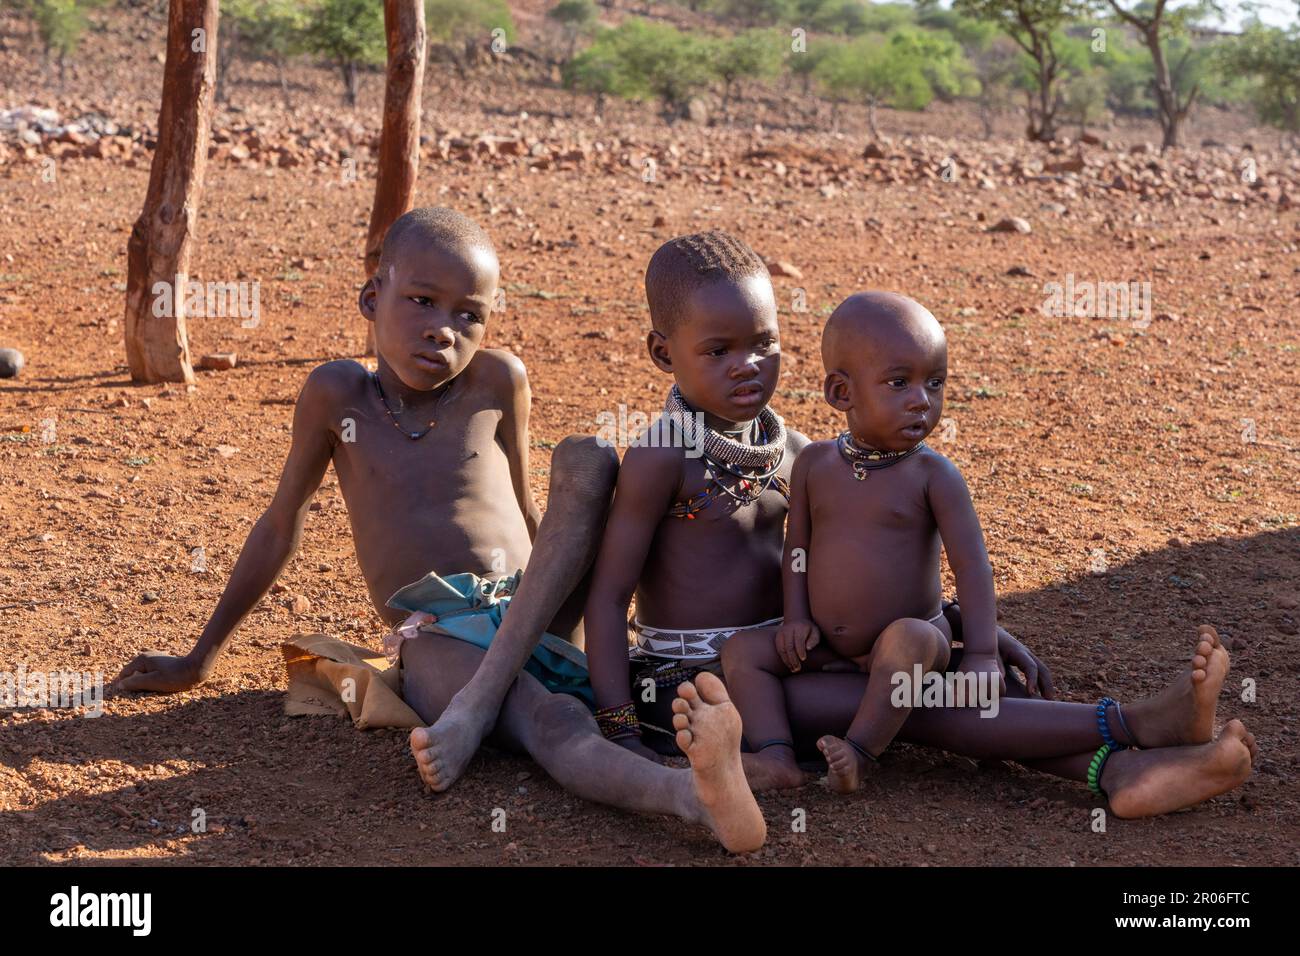 Himba people in Namibia Stock Photo